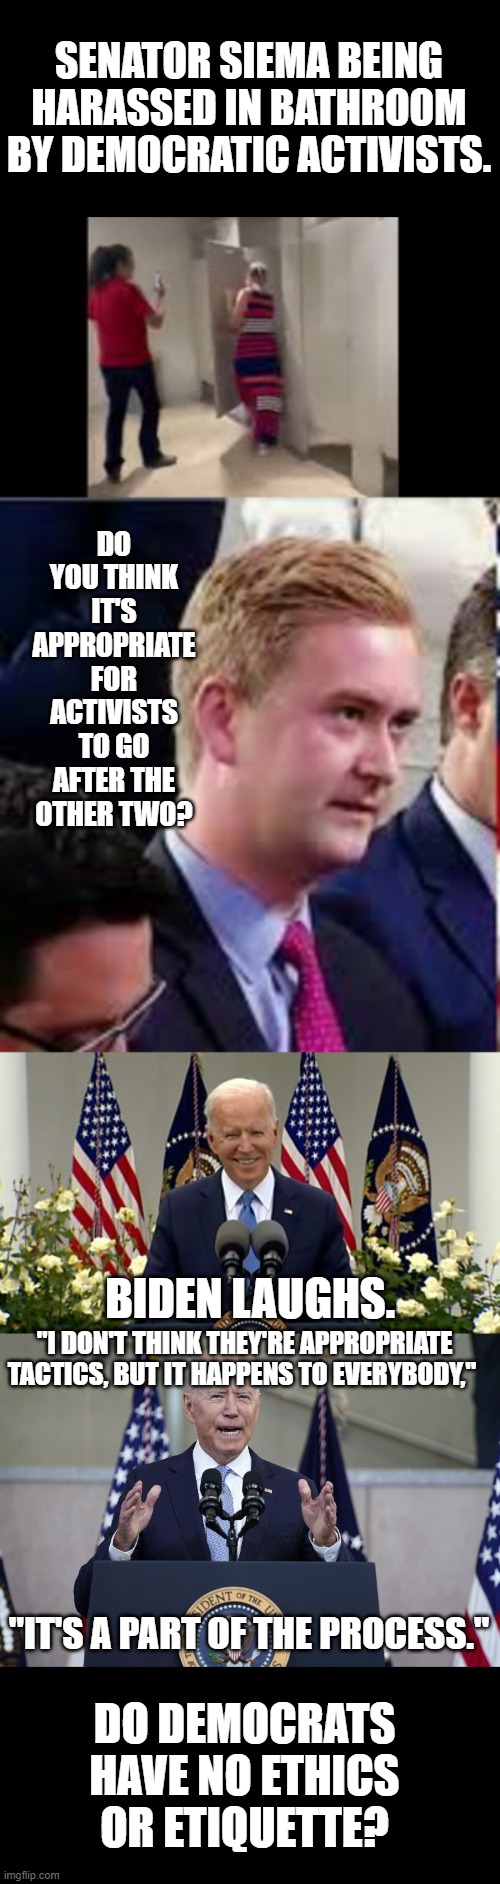 Biden Gives No Respect | SENATOR SIEMA BEING HARASSED IN BATHROOM BY DEMOCRATIC ACTIVISTS. DO YOU THINK IT'S APPROPRIATE FOR ACTIVISTS TO GO AFTER THE OTHER TWO? BIDEN LAUGHS. "I DON'T THINK THEY'RE APPROPRIATE TACTICS, BUT IT HAPPENS TO EVERYBODY,"; "IT'S A PART OF THE PROCESS."; DO DEMOCRATS HAVE NO ETHICS OR ETIQUETTE? | image tagged in memes,politics,joe biden,disrespect,other,democrats | made w/ Imgflip meme maker